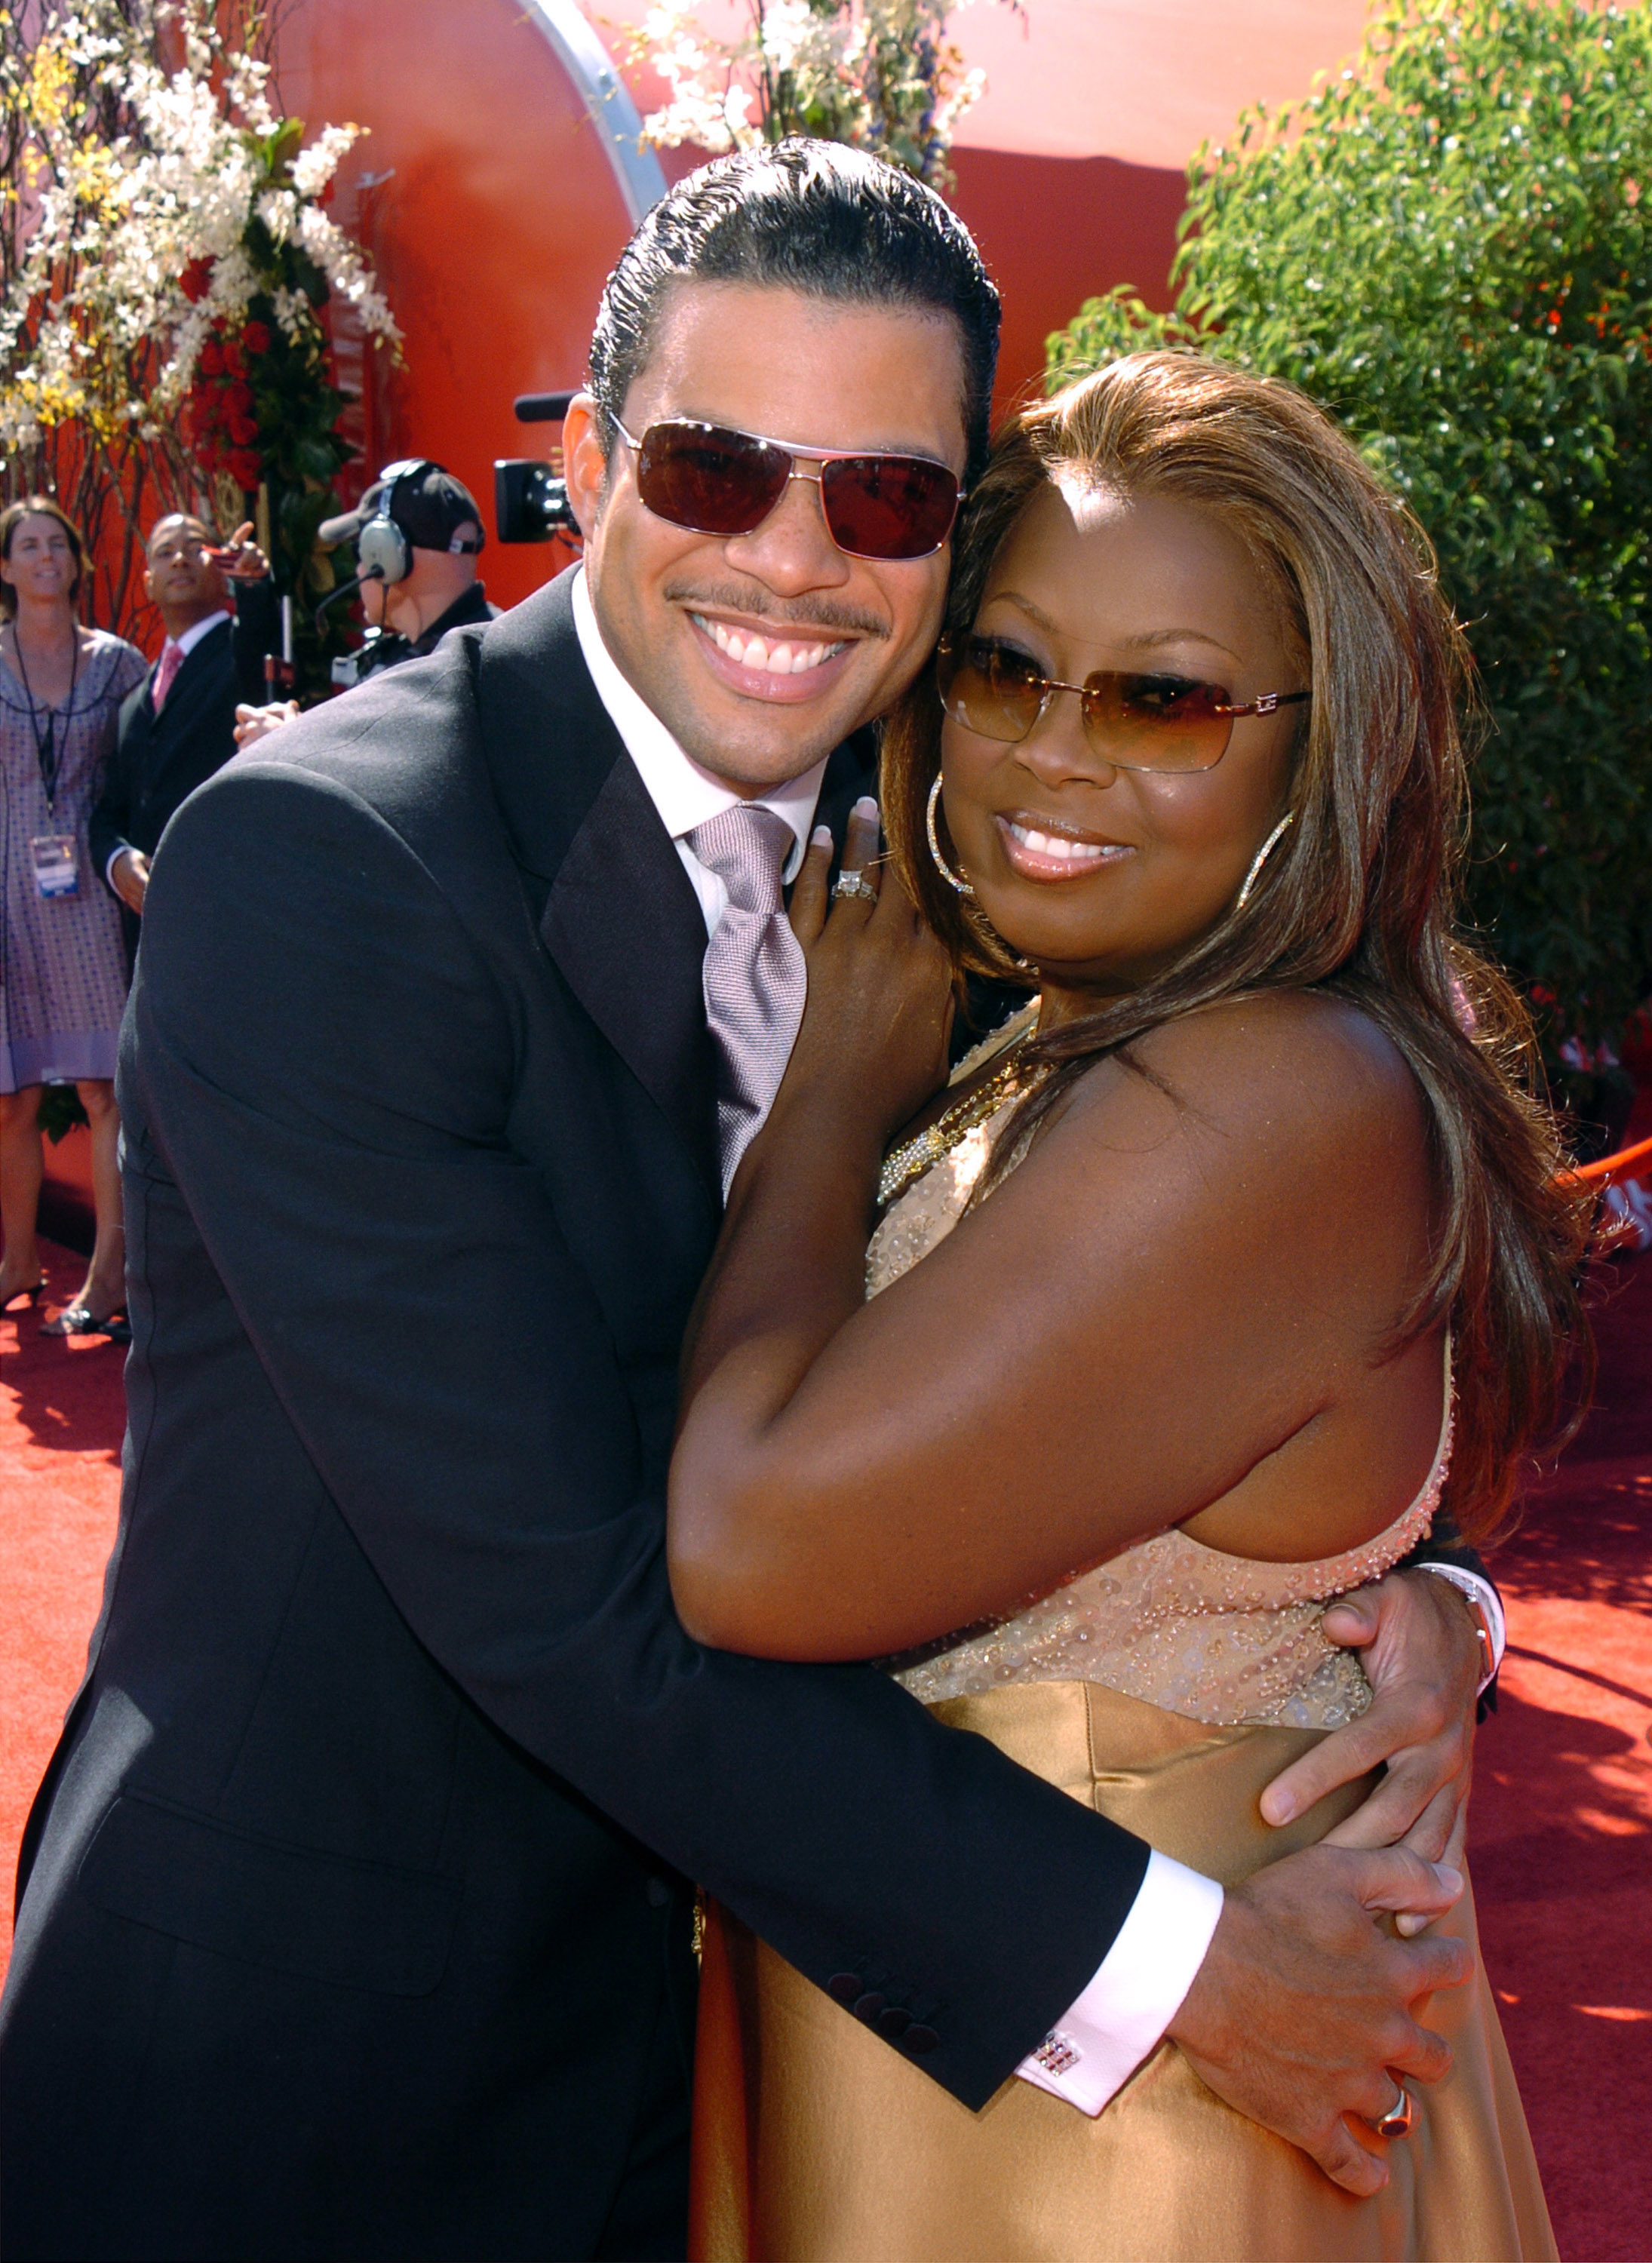 On the red carpet, he&#x27;s smiling, wearing a suit and tie and sunglasses, and has his arms around her; she&#x27;s smiling and wearing a sleeveless dress and sunglasses